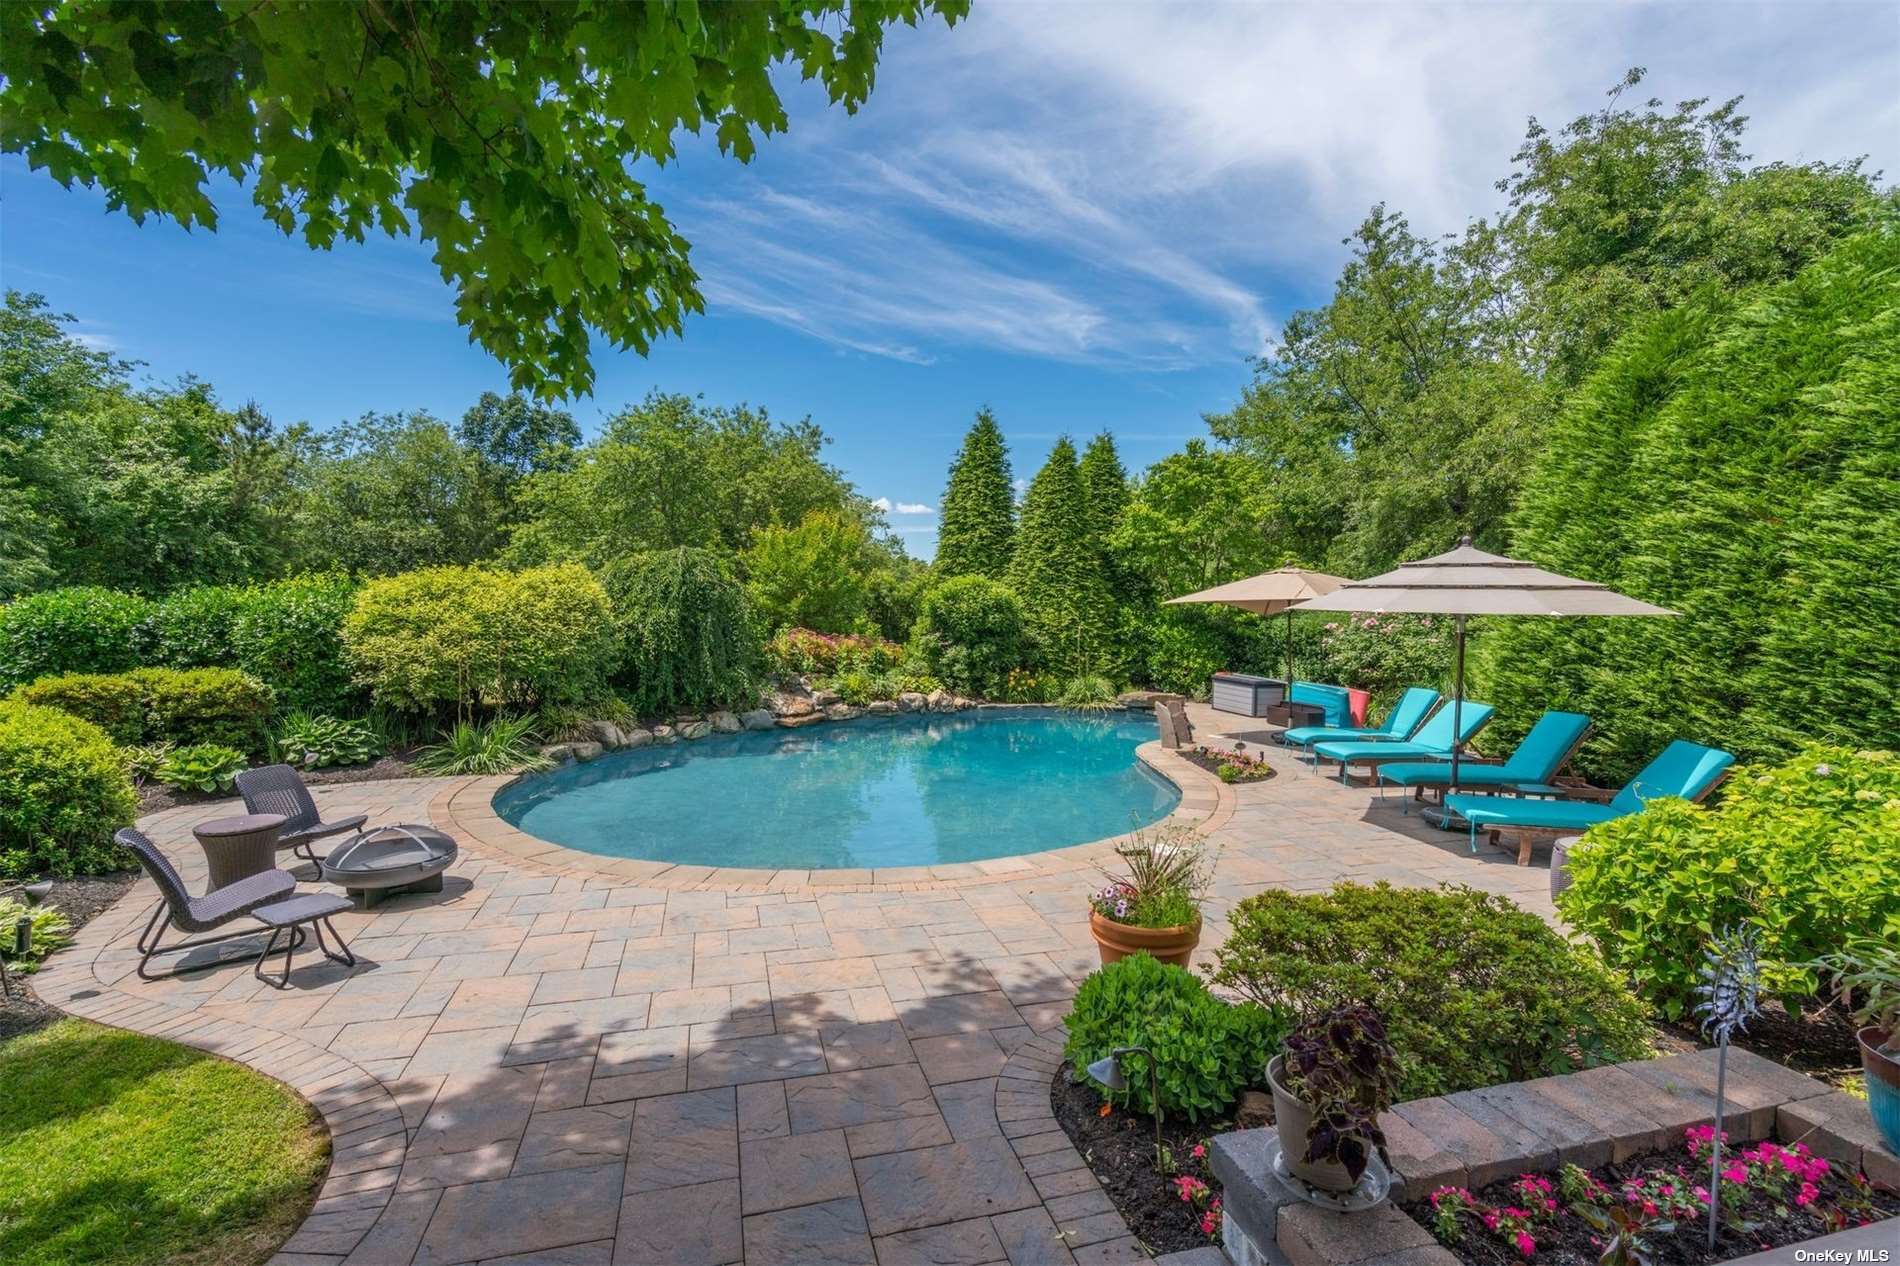 a view of a backyard with swimming pool and furniture